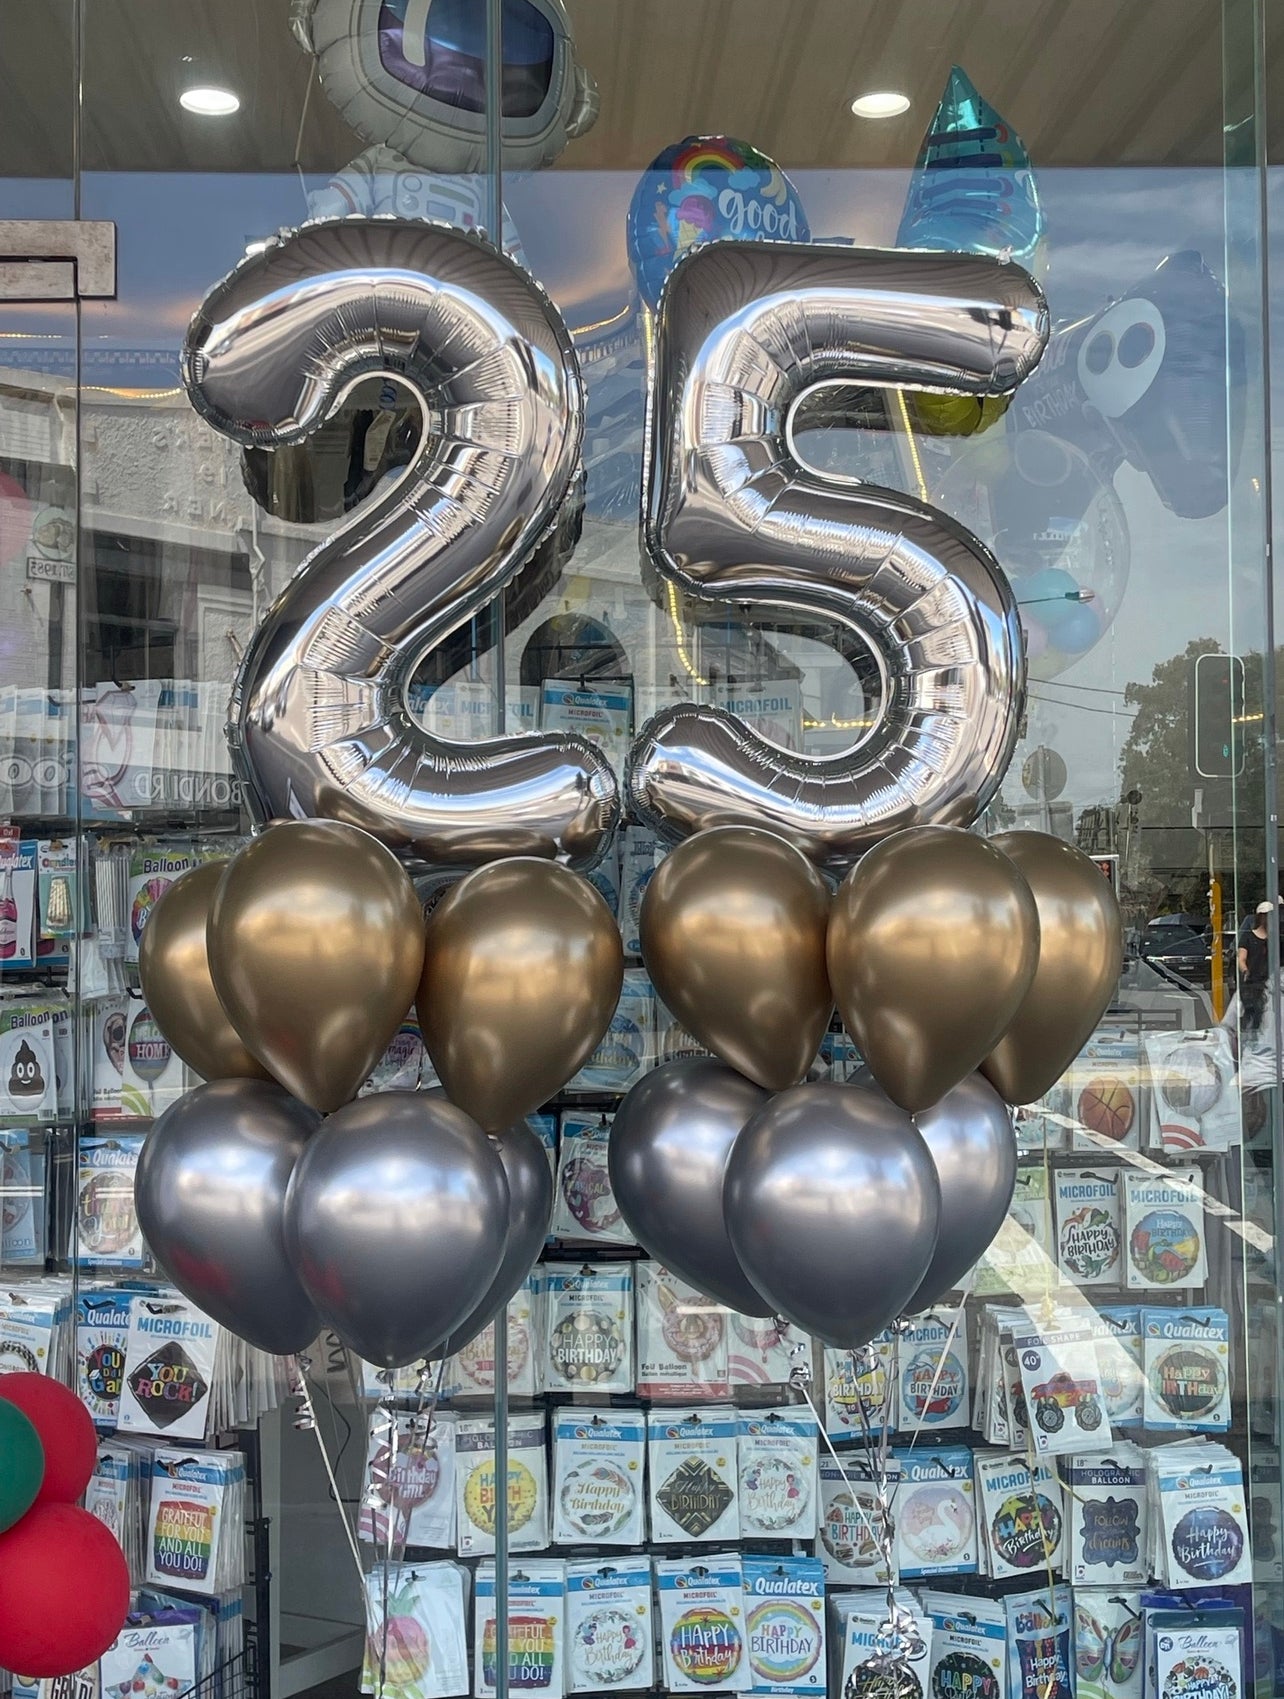 2 Large Rose Gold Numbers with 12 metallic / chrome latex 28cm balloons